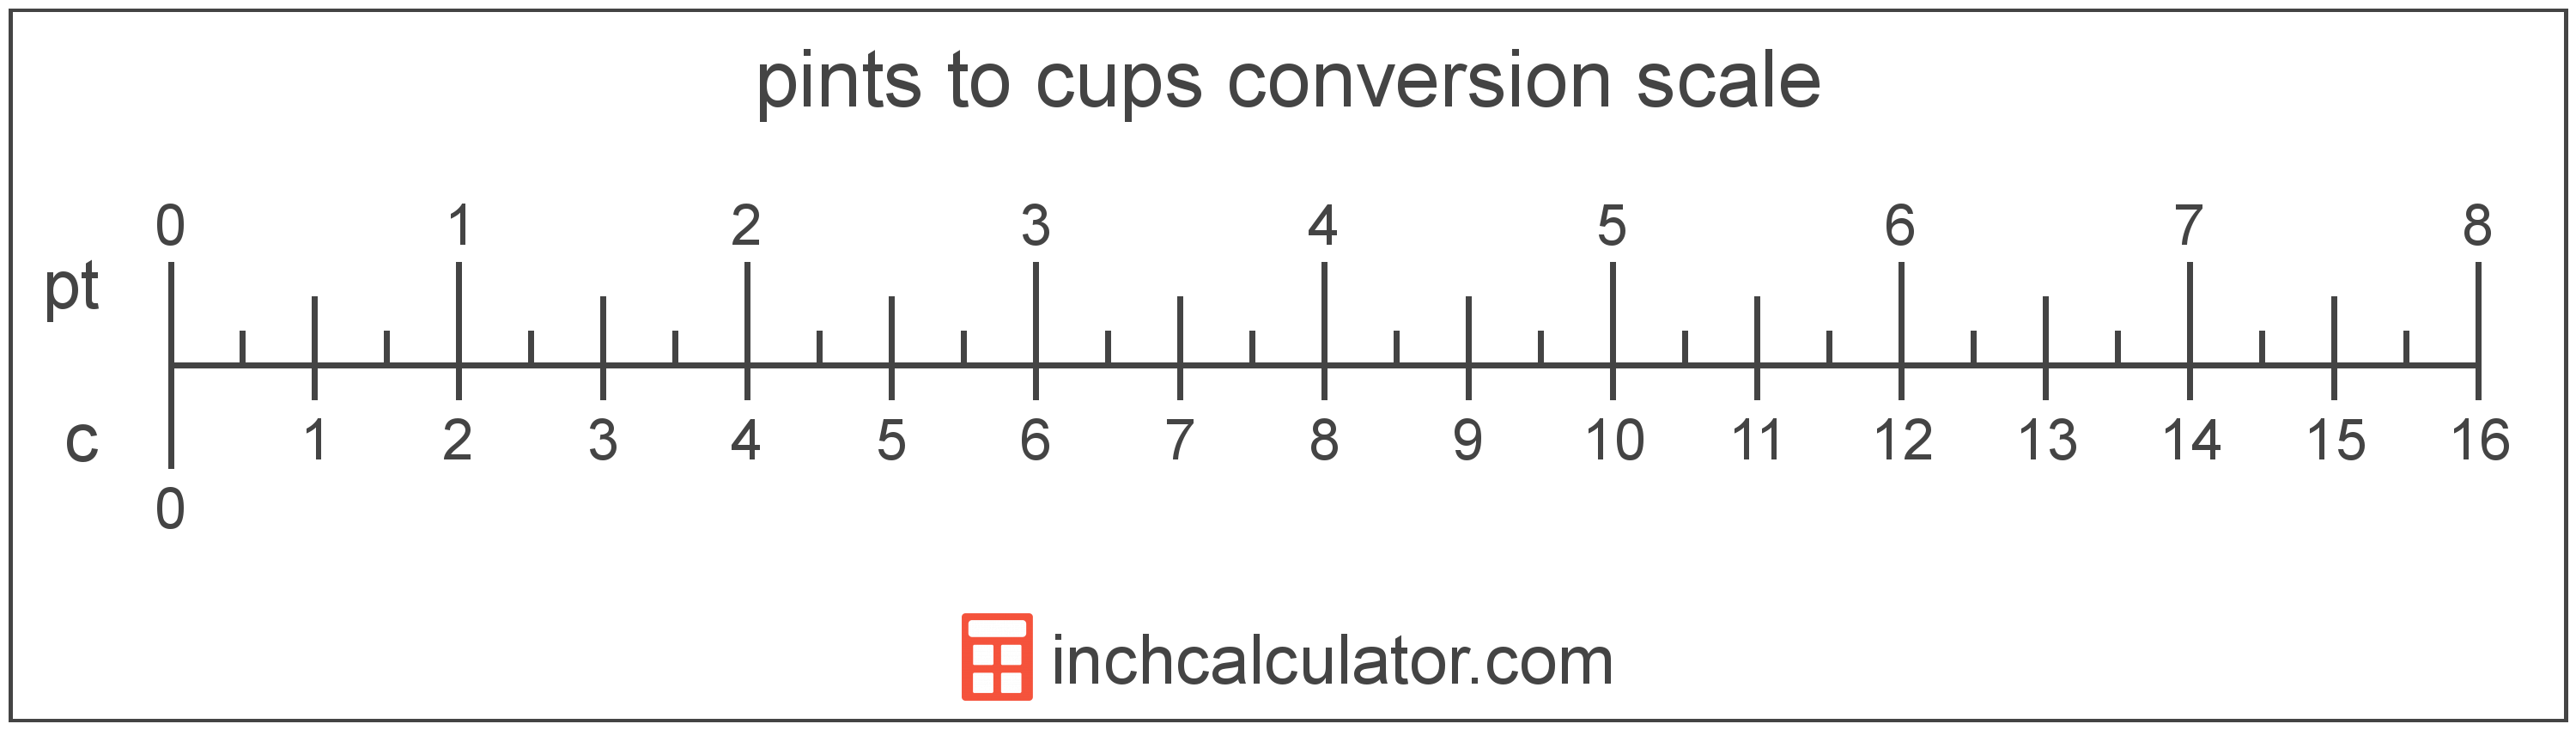 conversion scale showing cups and equivalent pints volume values